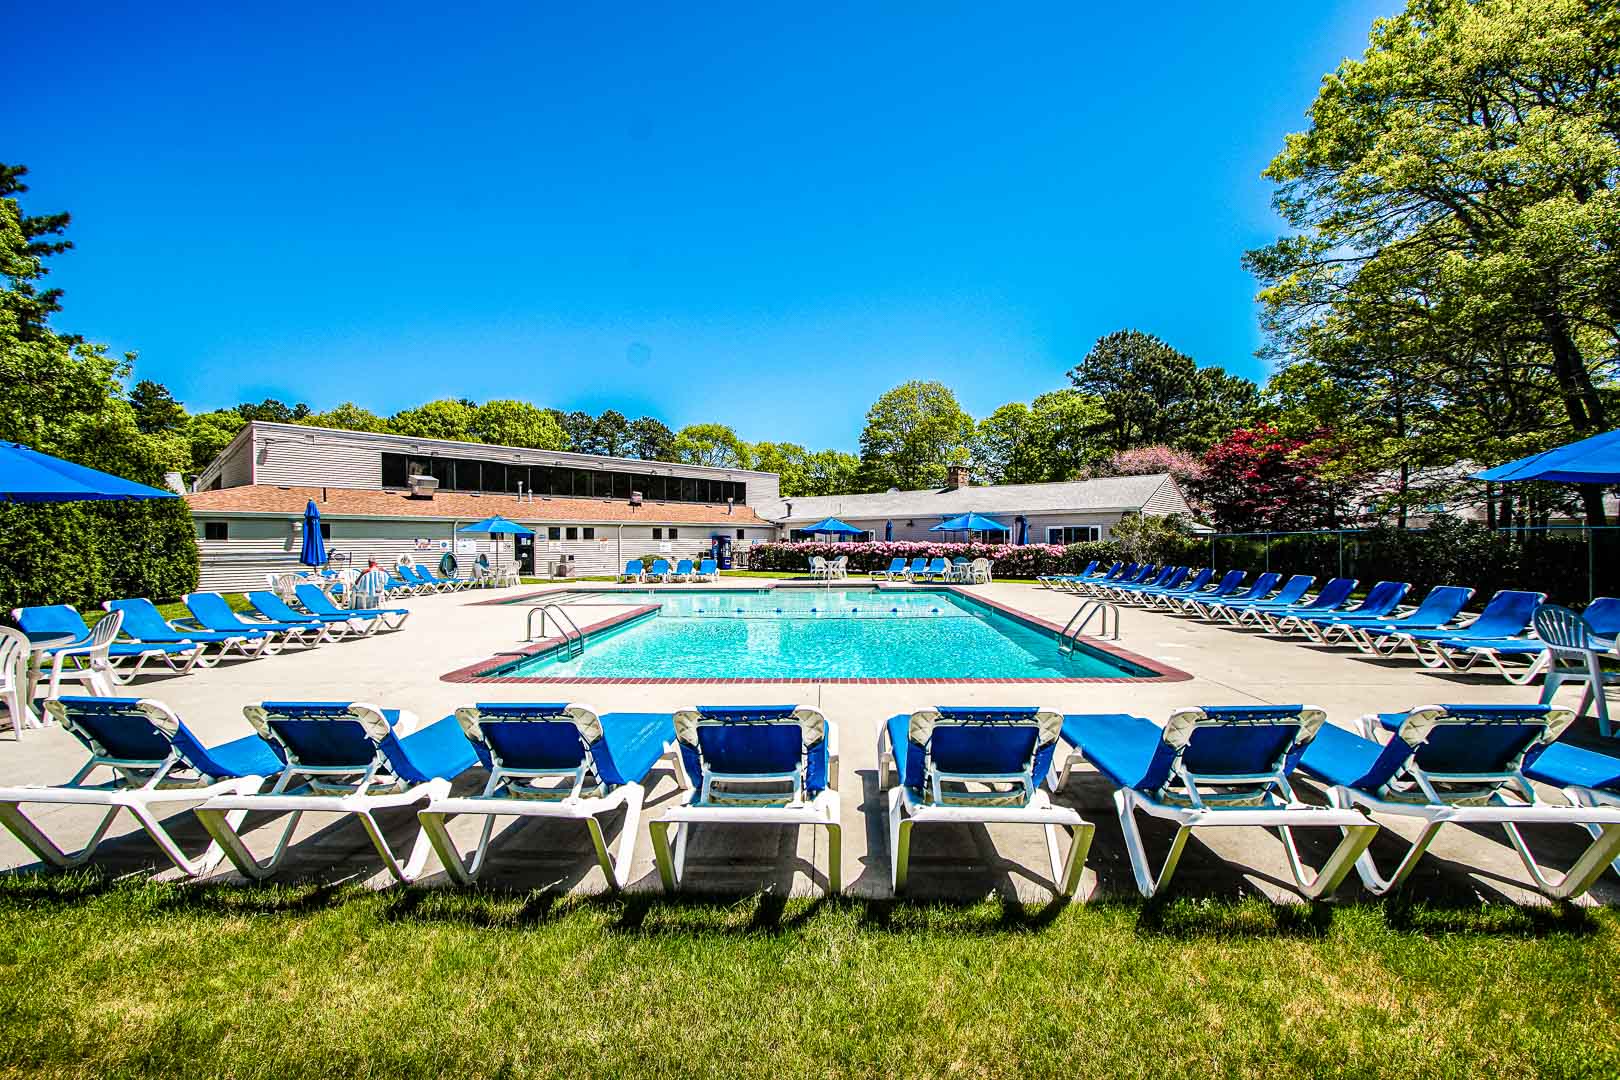 An expansive view of the outdoor swimming pool and lounging chairs at VRI's Sea Mist Resort in Massachusetts.